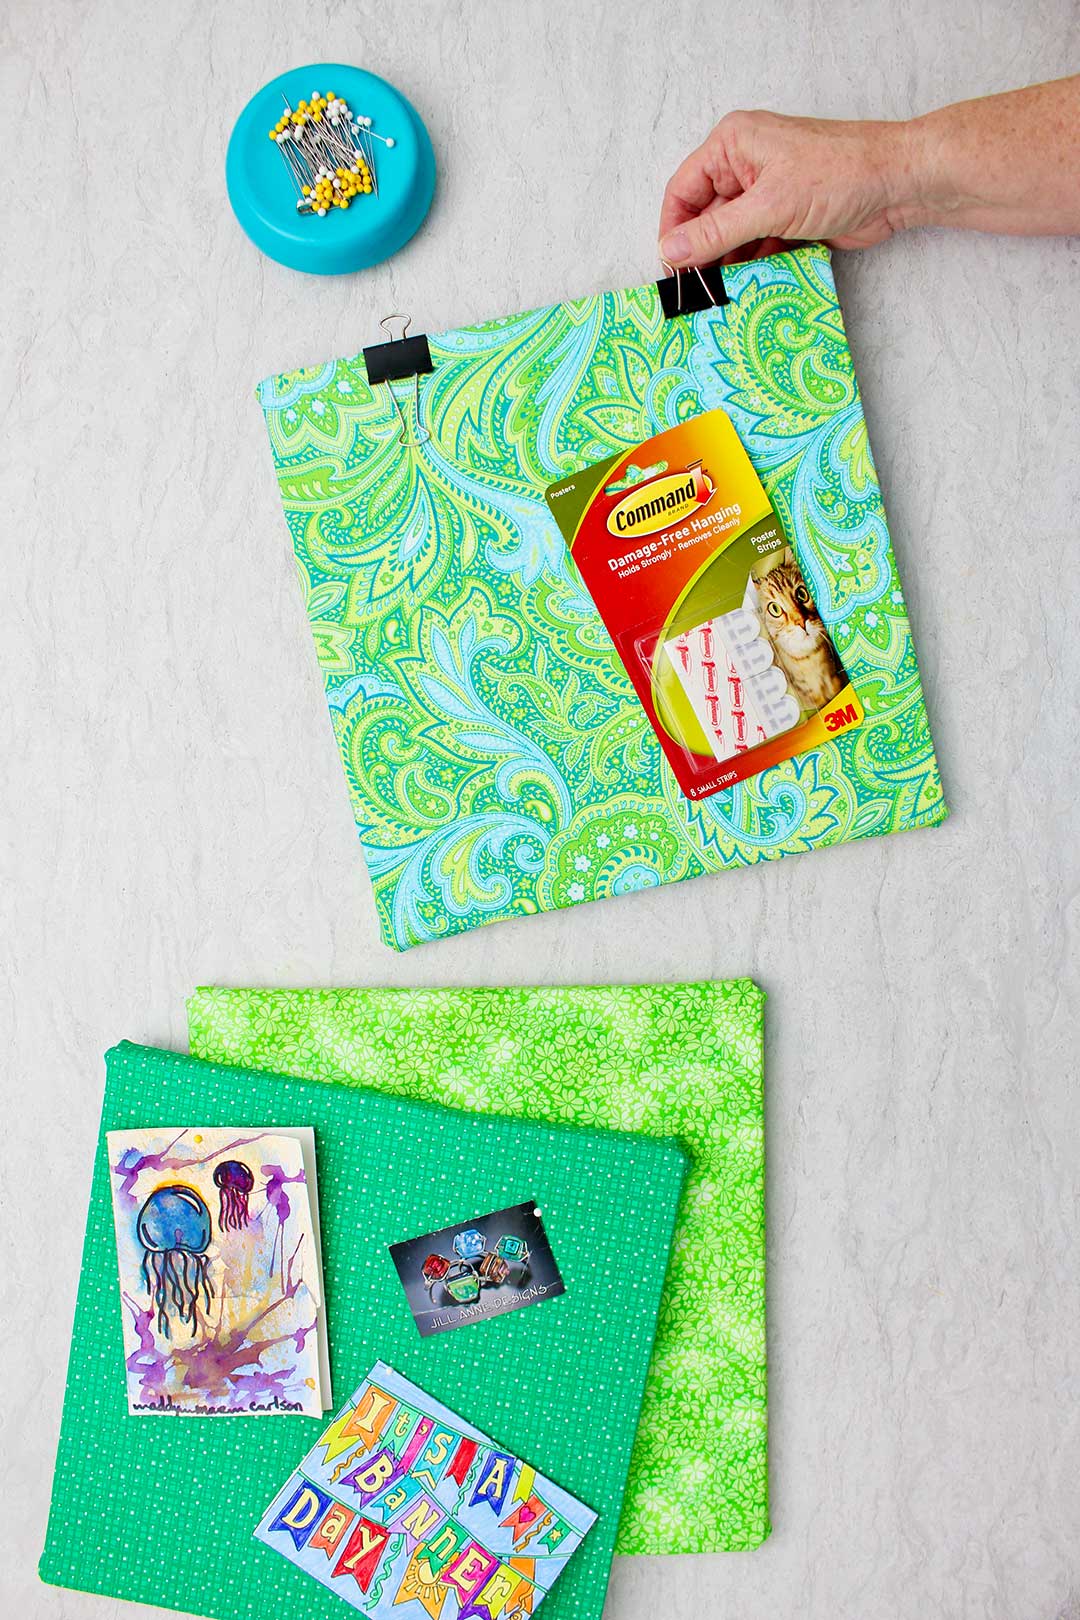 Hand securing binder clip the top of a foam core bulletin board in green paisley fabric.